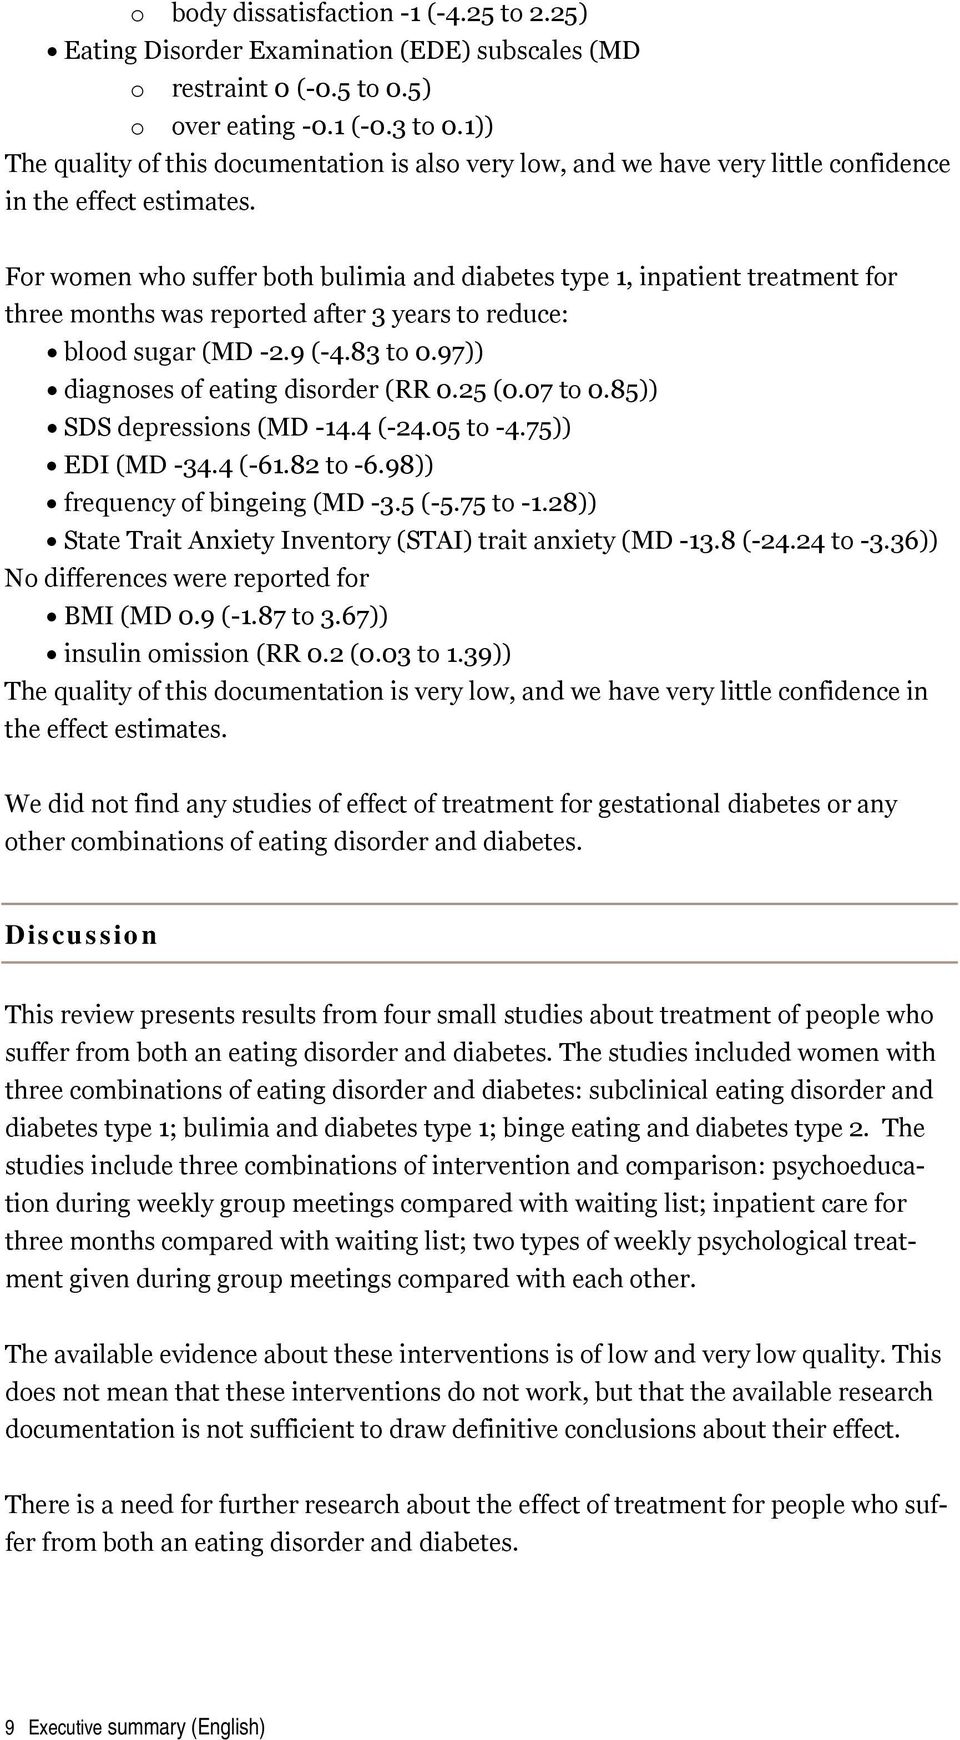 For women who suffer both bulimia and diabetes type 1, inpatient treatment for three months was reported after 3 years to reduce: blood sugar (MD -2.9 (-4.83 to 0.